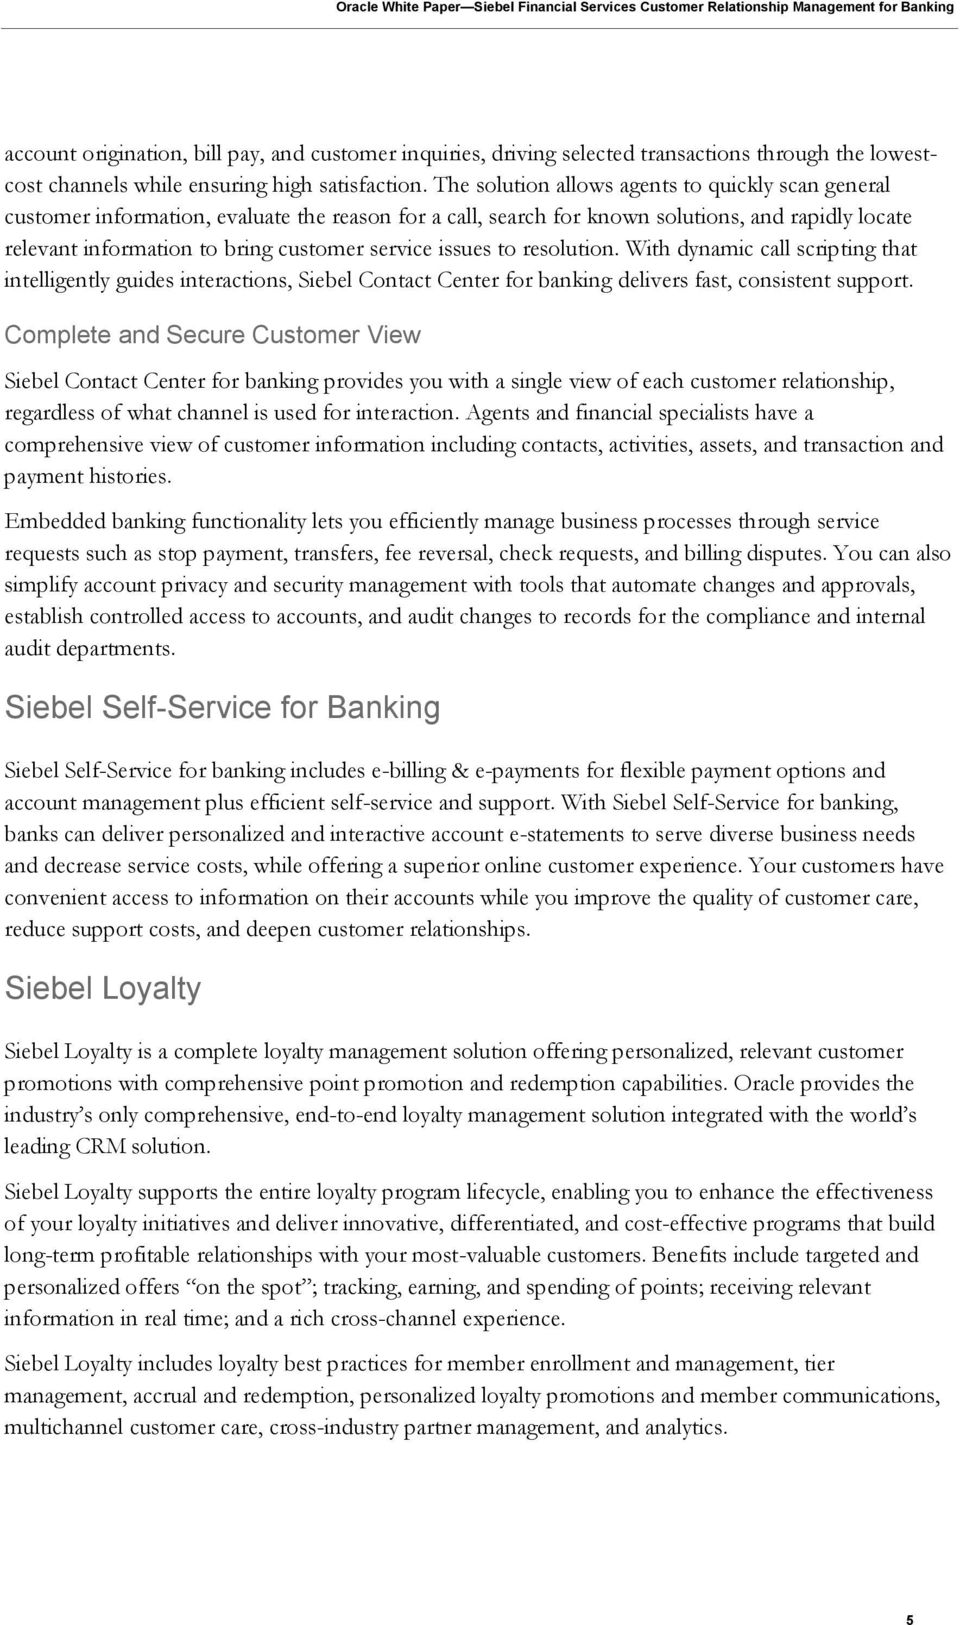 issues to resolution. With dynamic call scripting that intelligently guides interactions, Siebel Contact Center for banking delivers fast, consistent support.